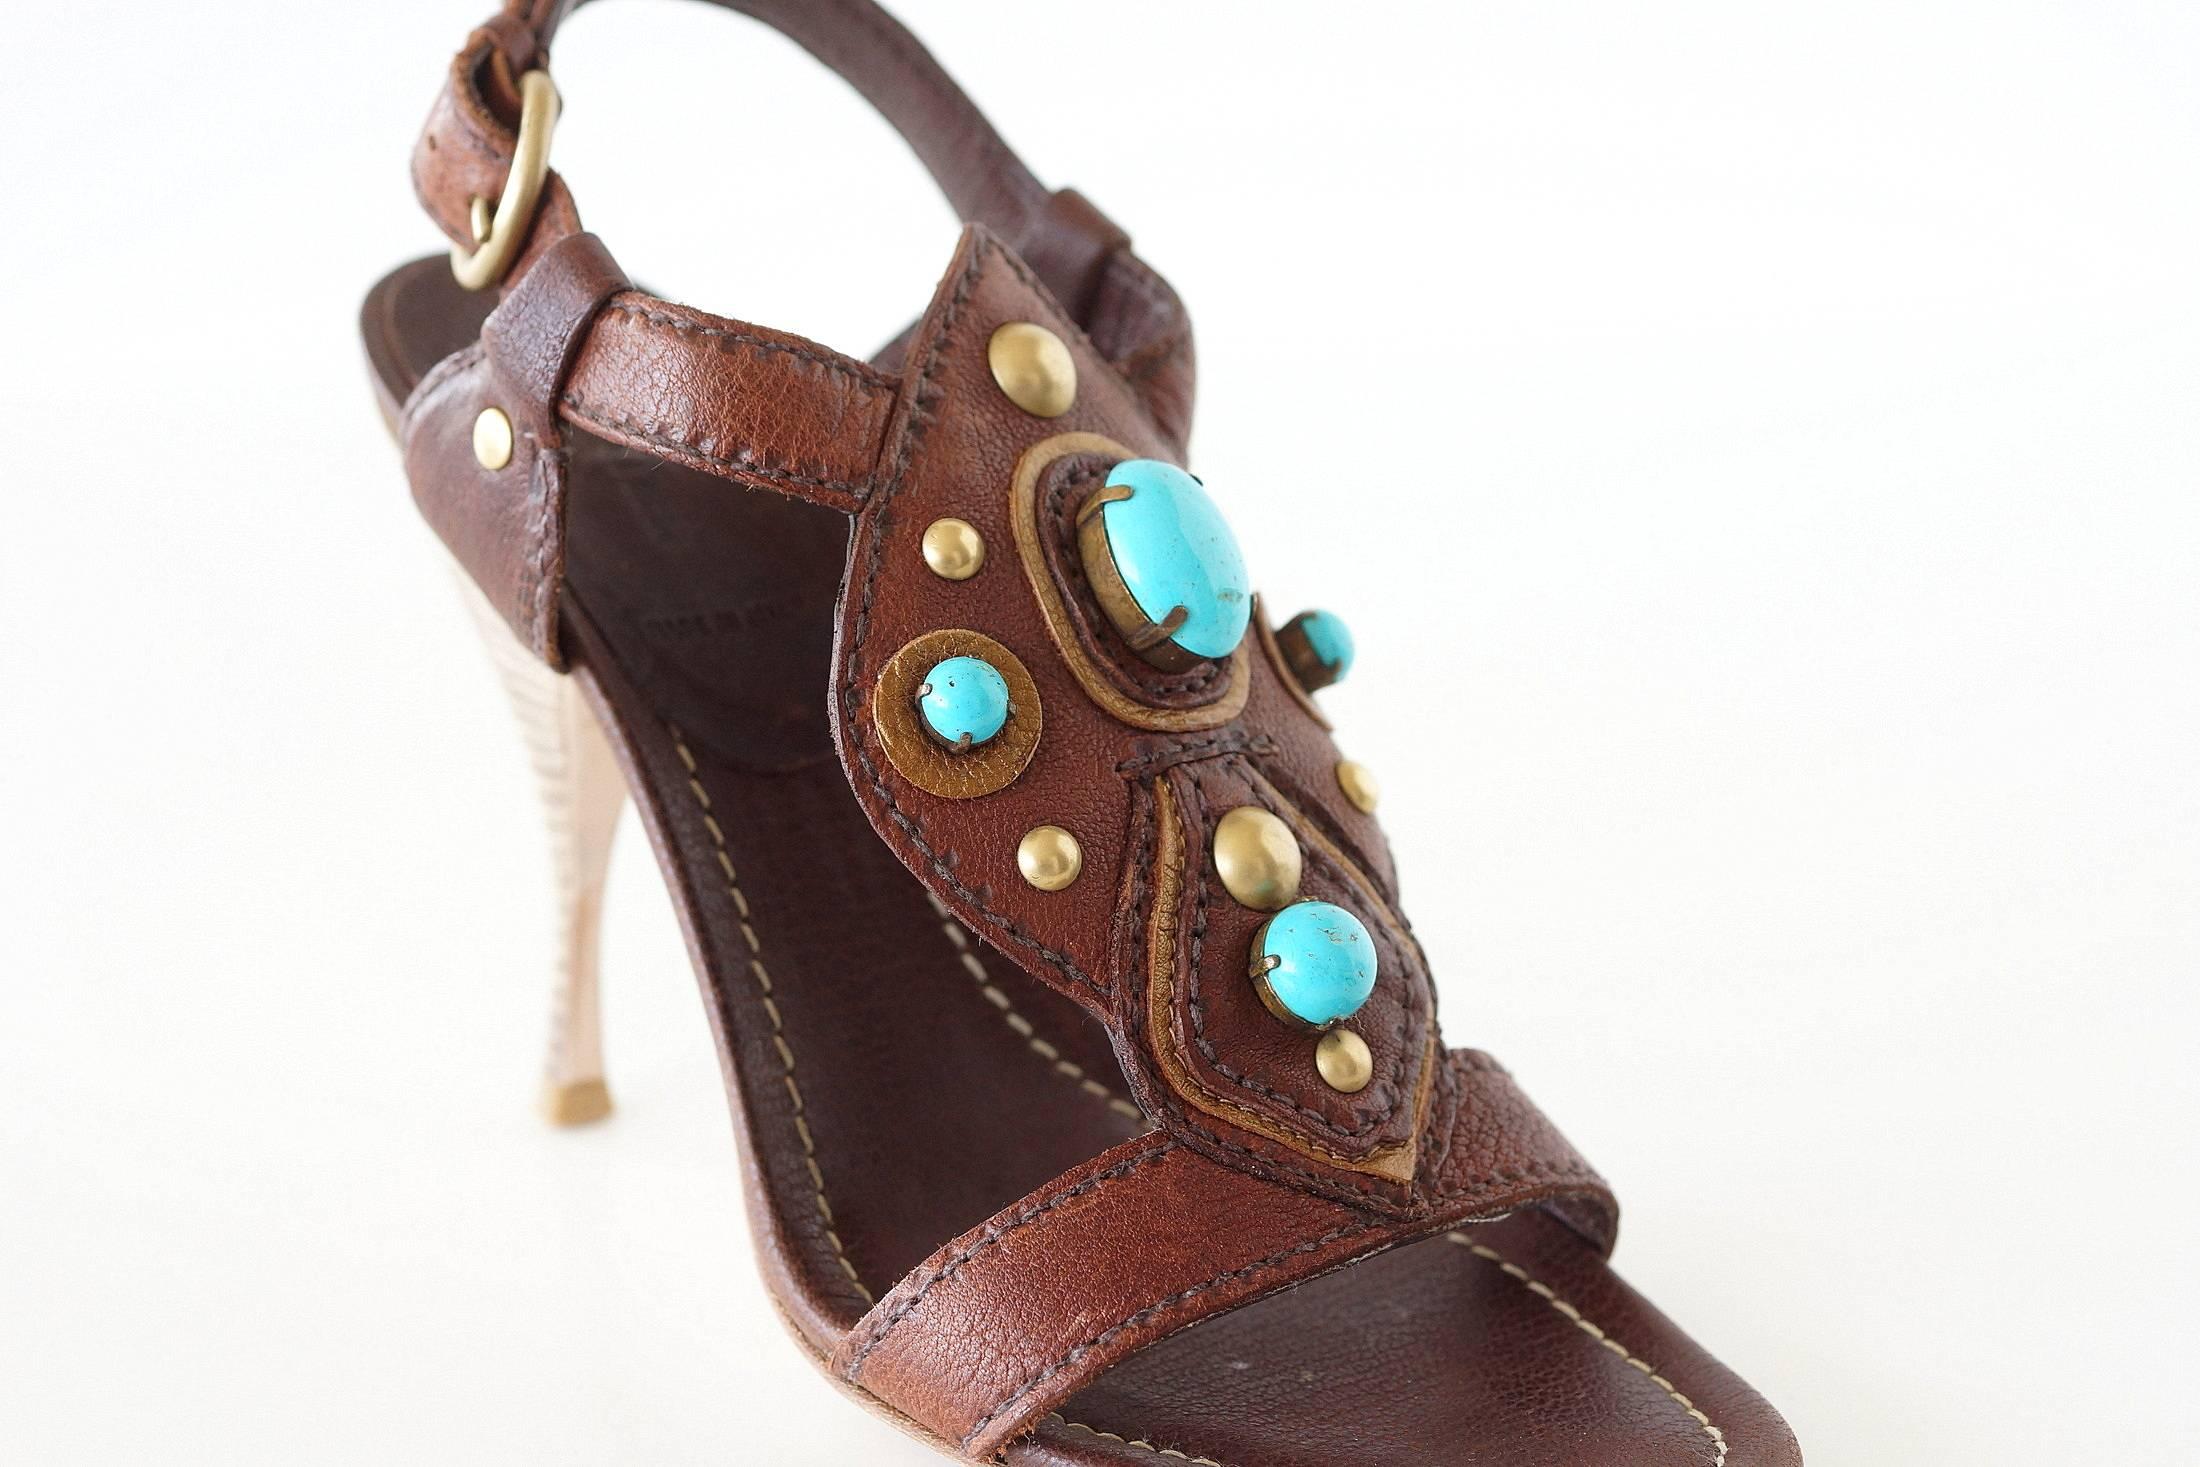 Guaranteed authentic Miu Miu shoe in rich brown Buffalo leather.
The top of the foot has fabulous leather work accentuated with turquoise stones and brass studs.
Bronzey gold leather trim around the turquoise stones.
Round brass buckle on the side